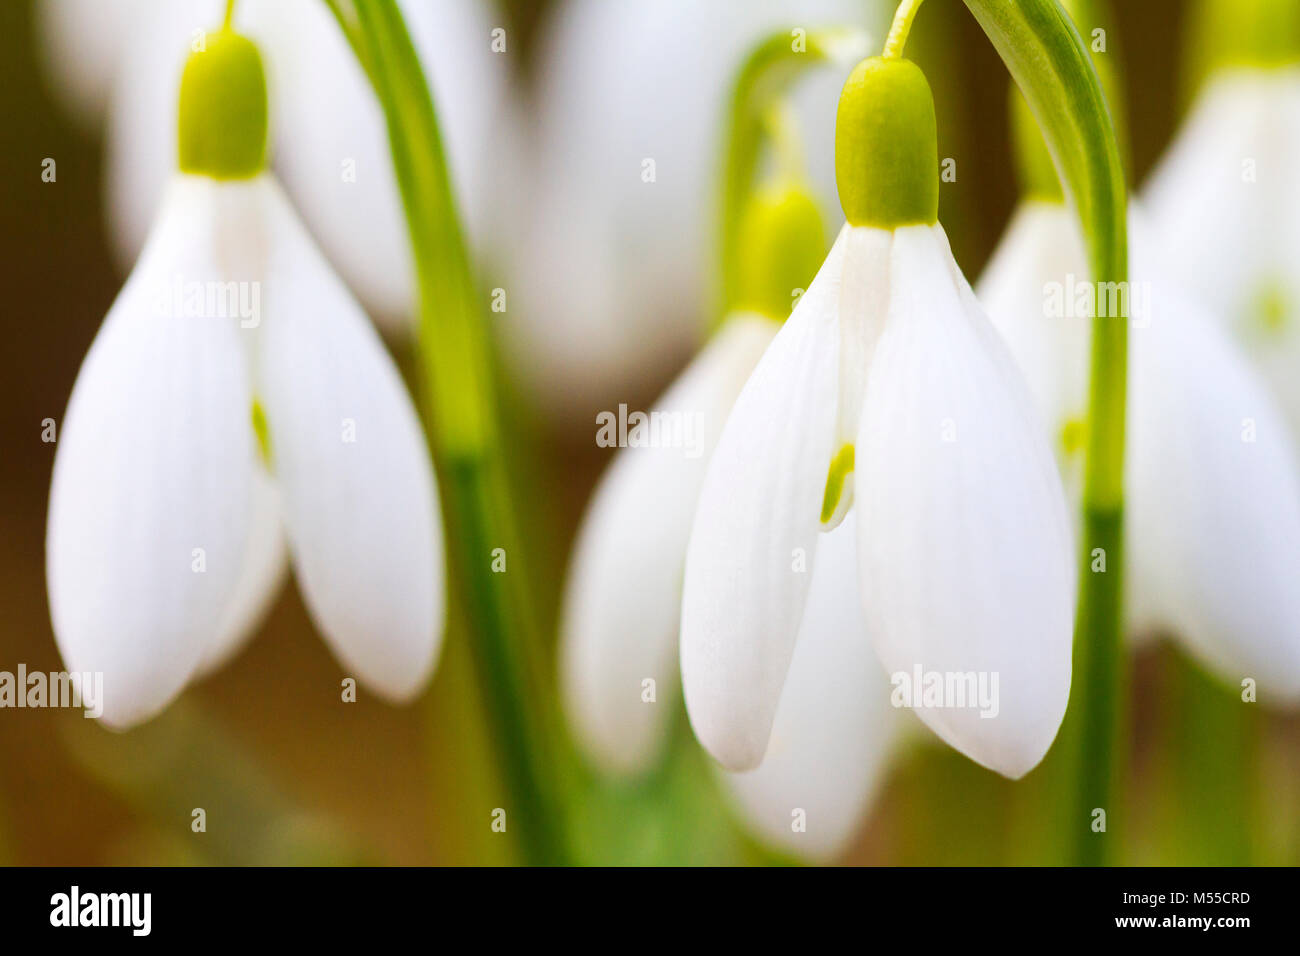 Closeup shot of fresh common snowdrops (Galanthus nivalis) blooming in the spring. Wild flowers field. Stock Photo